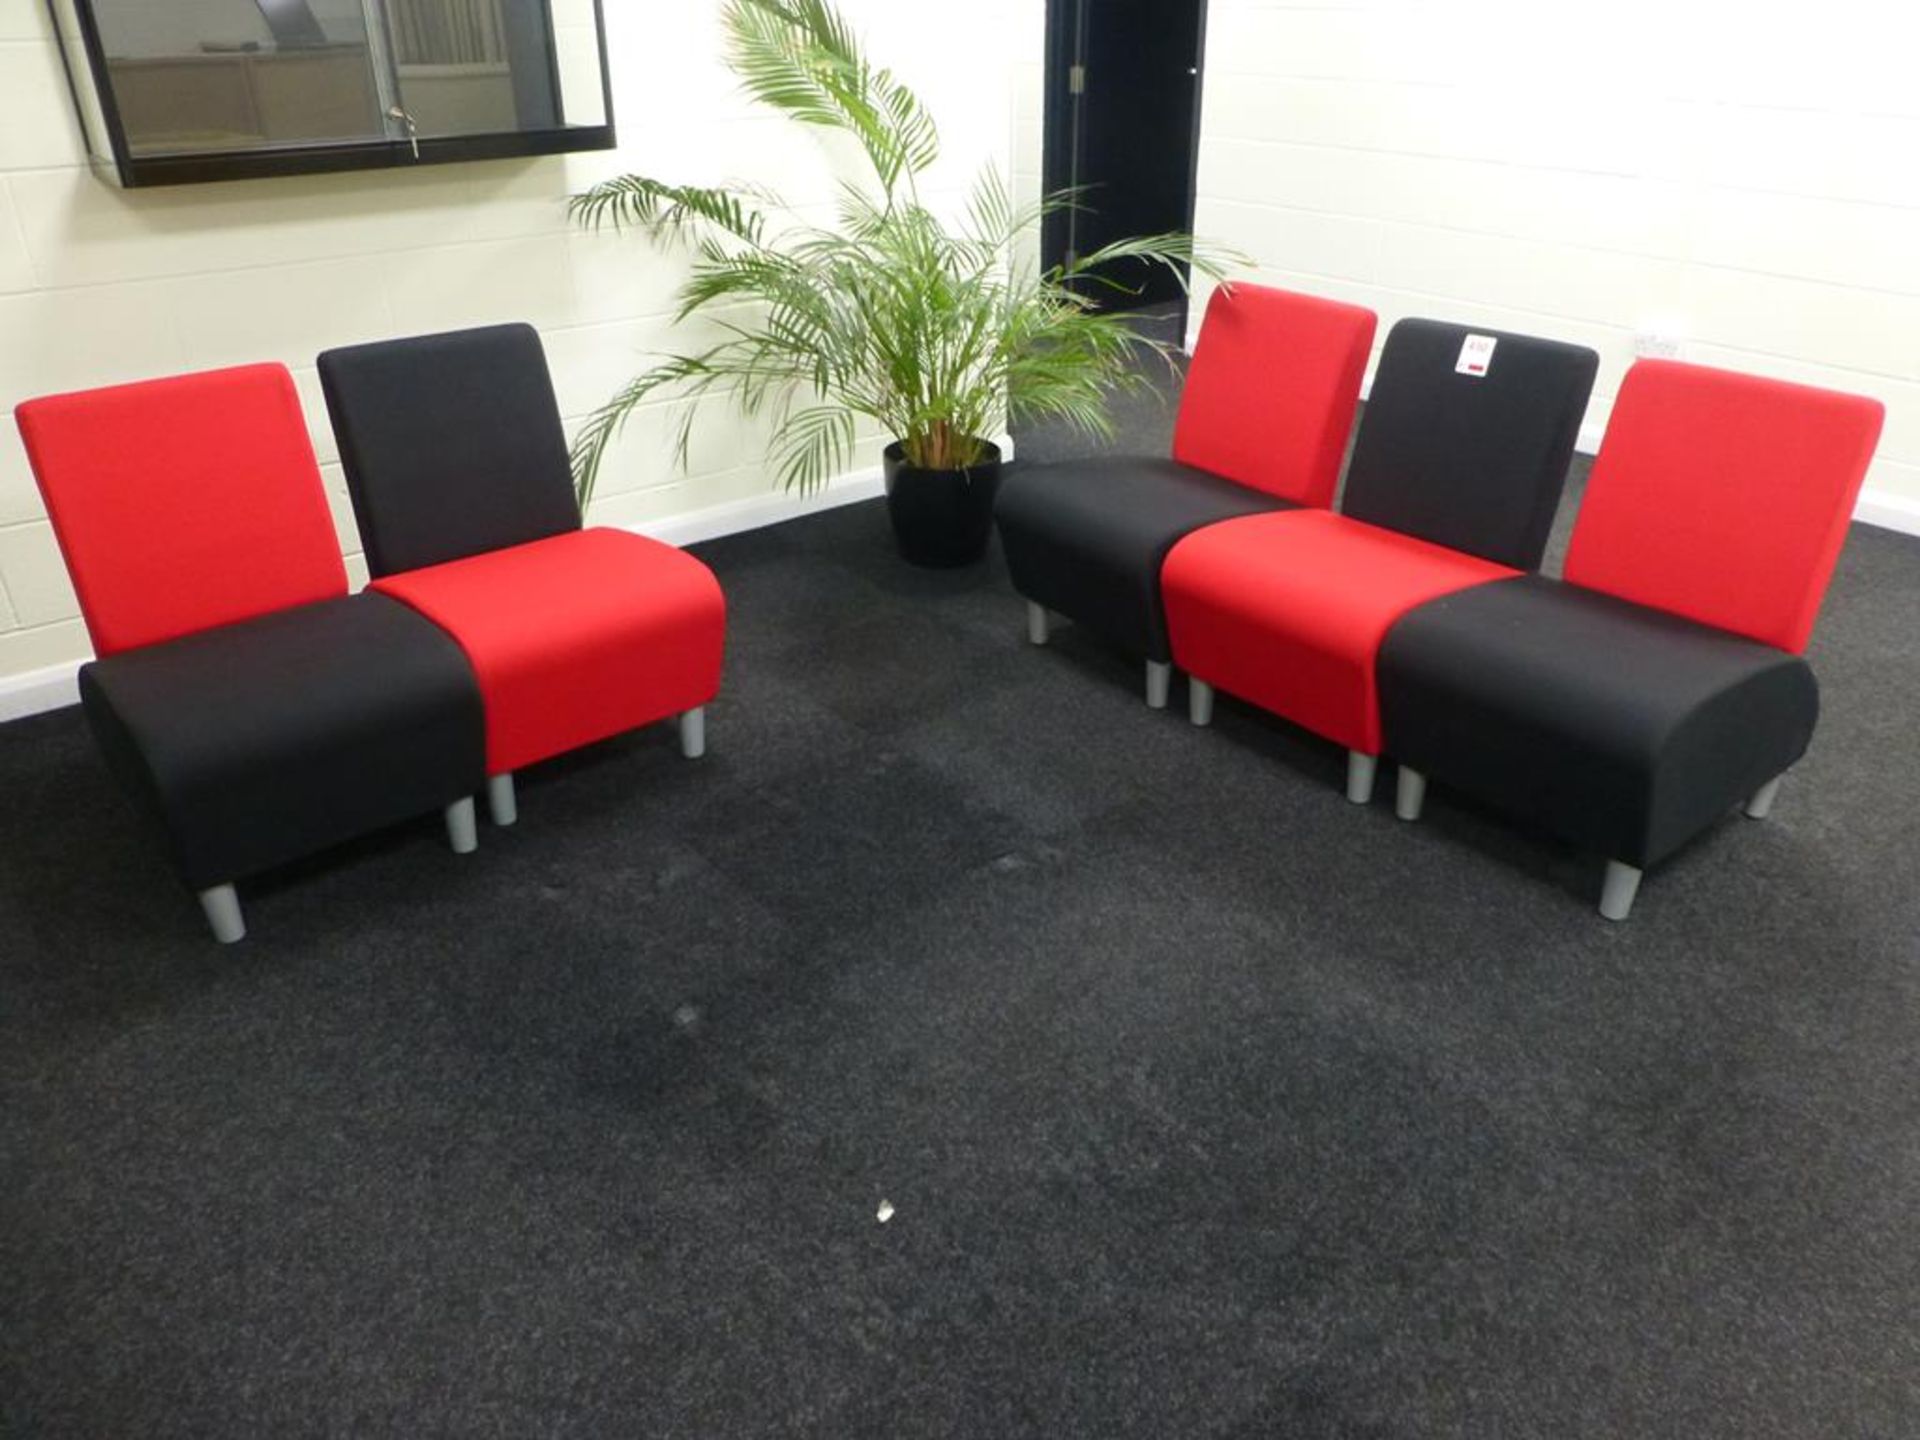 5 red/black fabric upholstered reception chairs